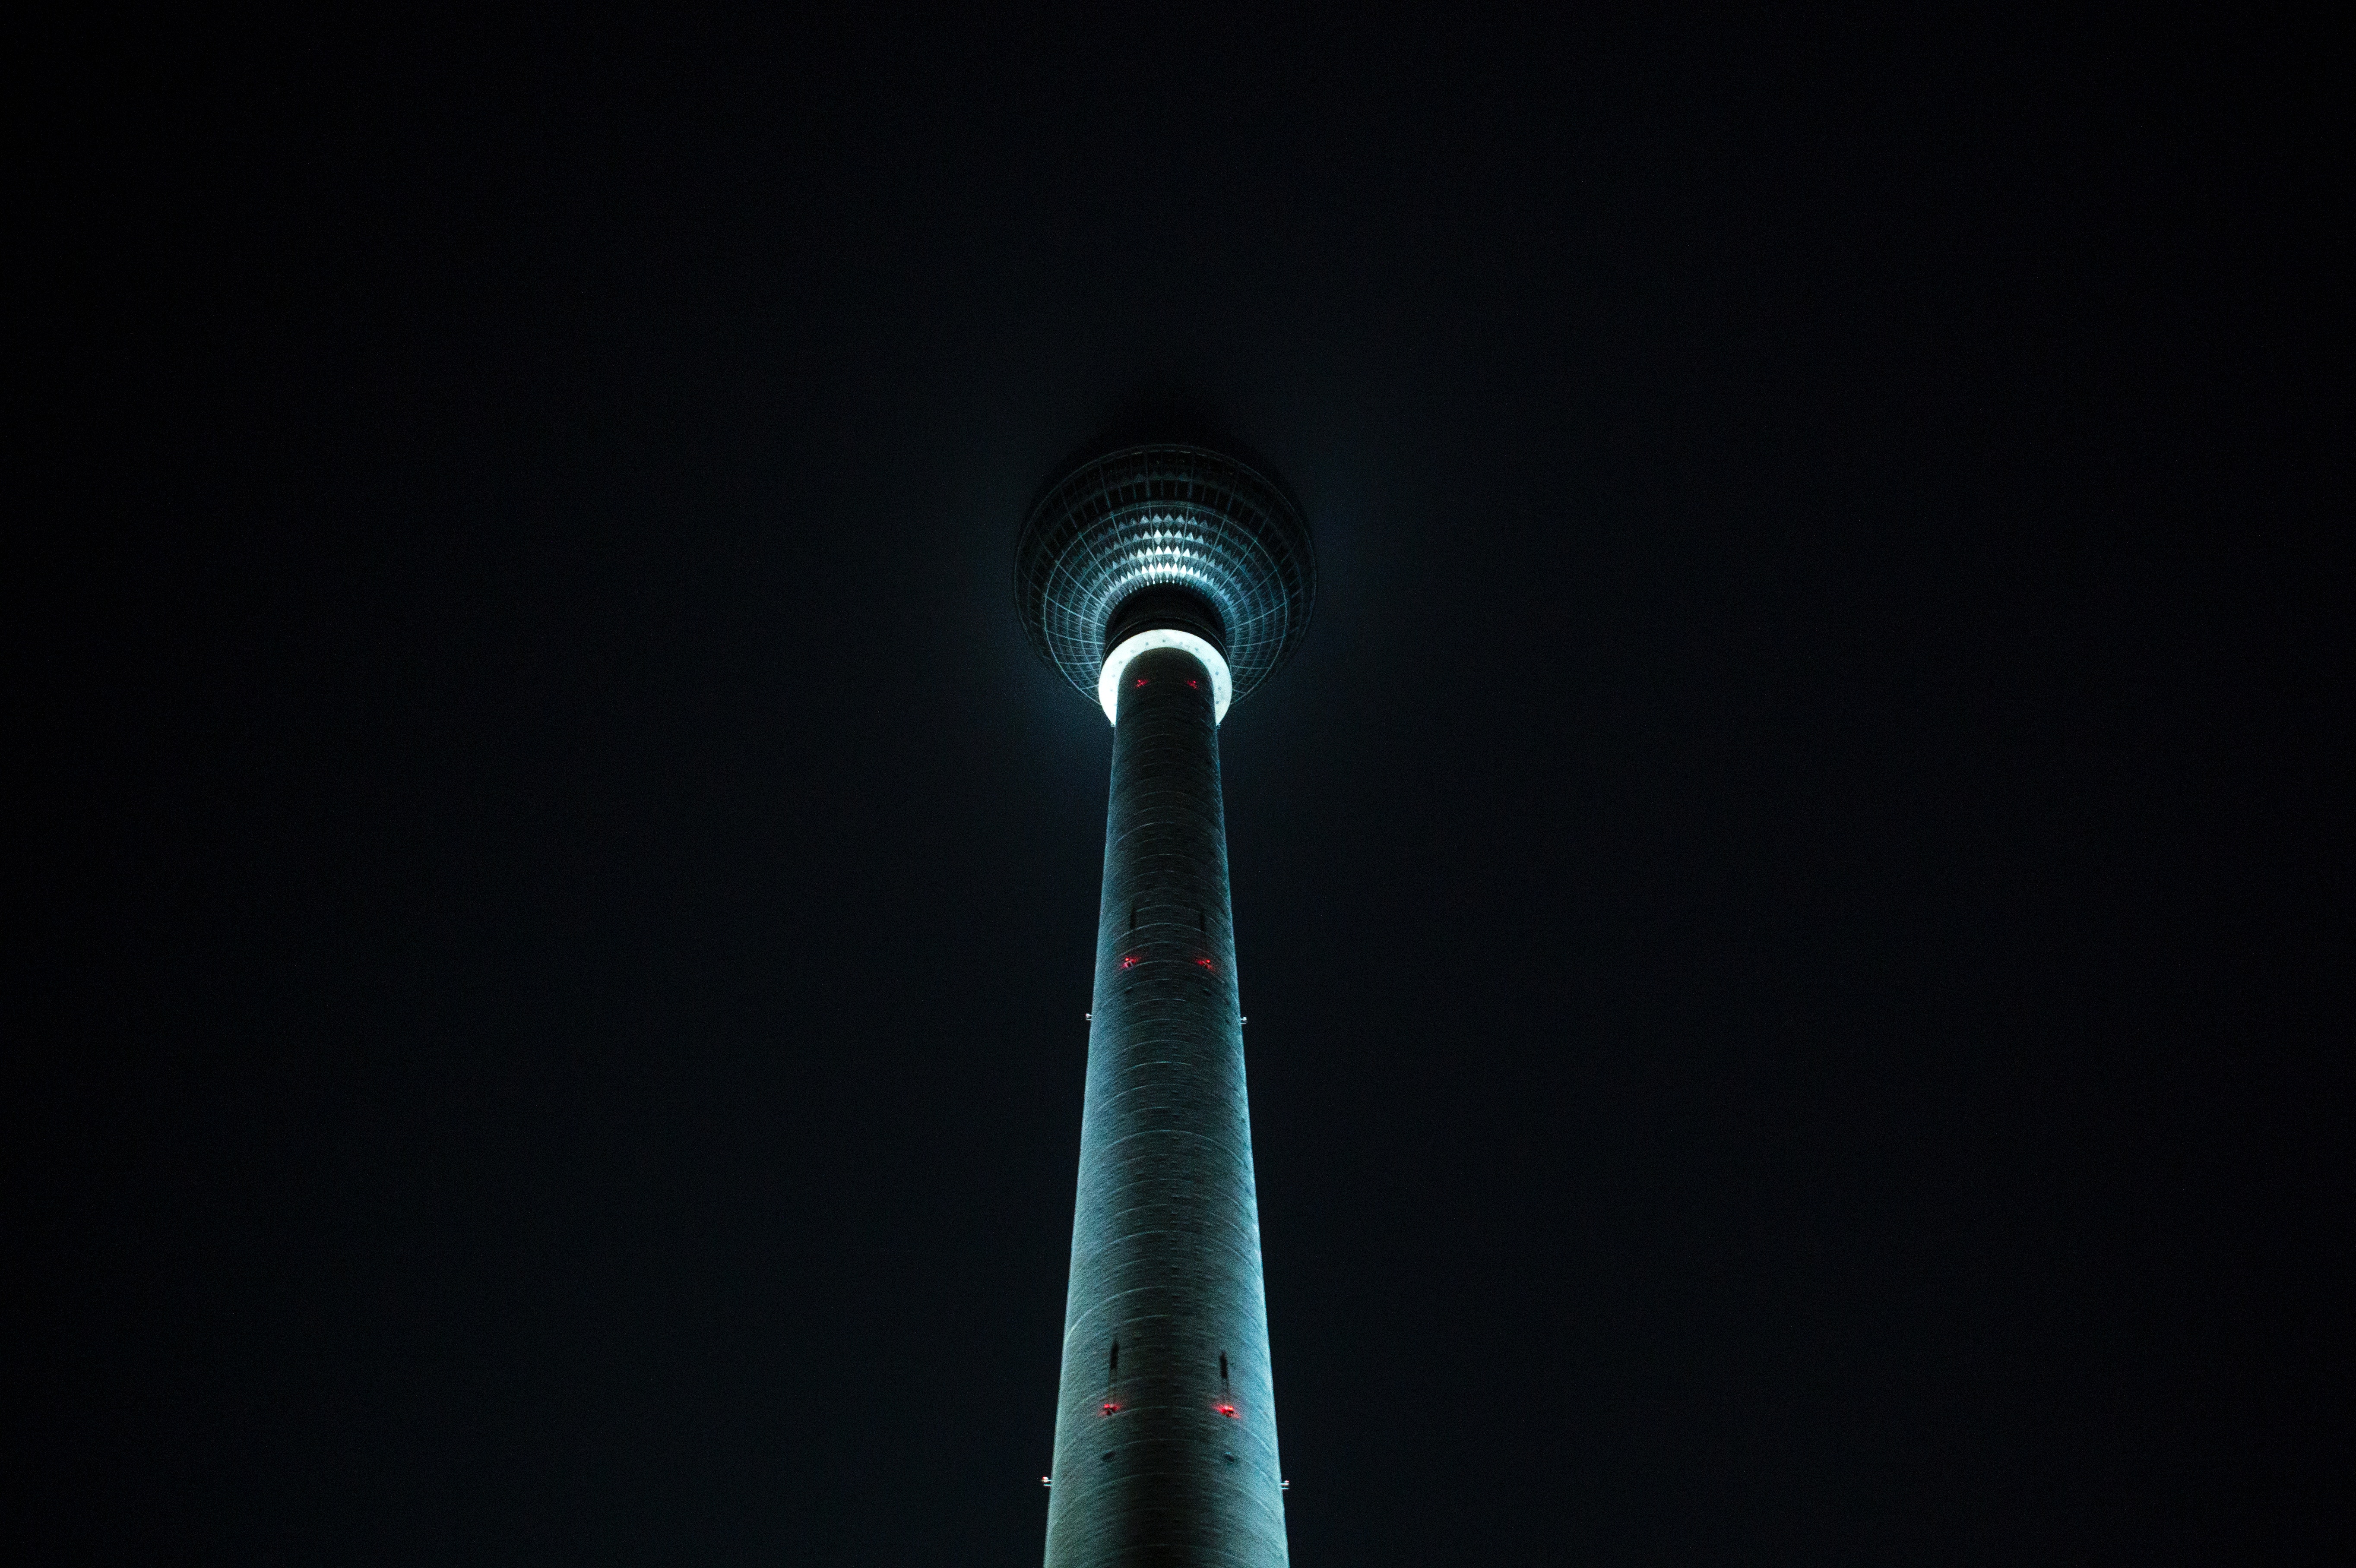 52075 free wallpaper 1125x2436 for phone, download images lighting, illumination, night, tower 1125x2436 for mobile